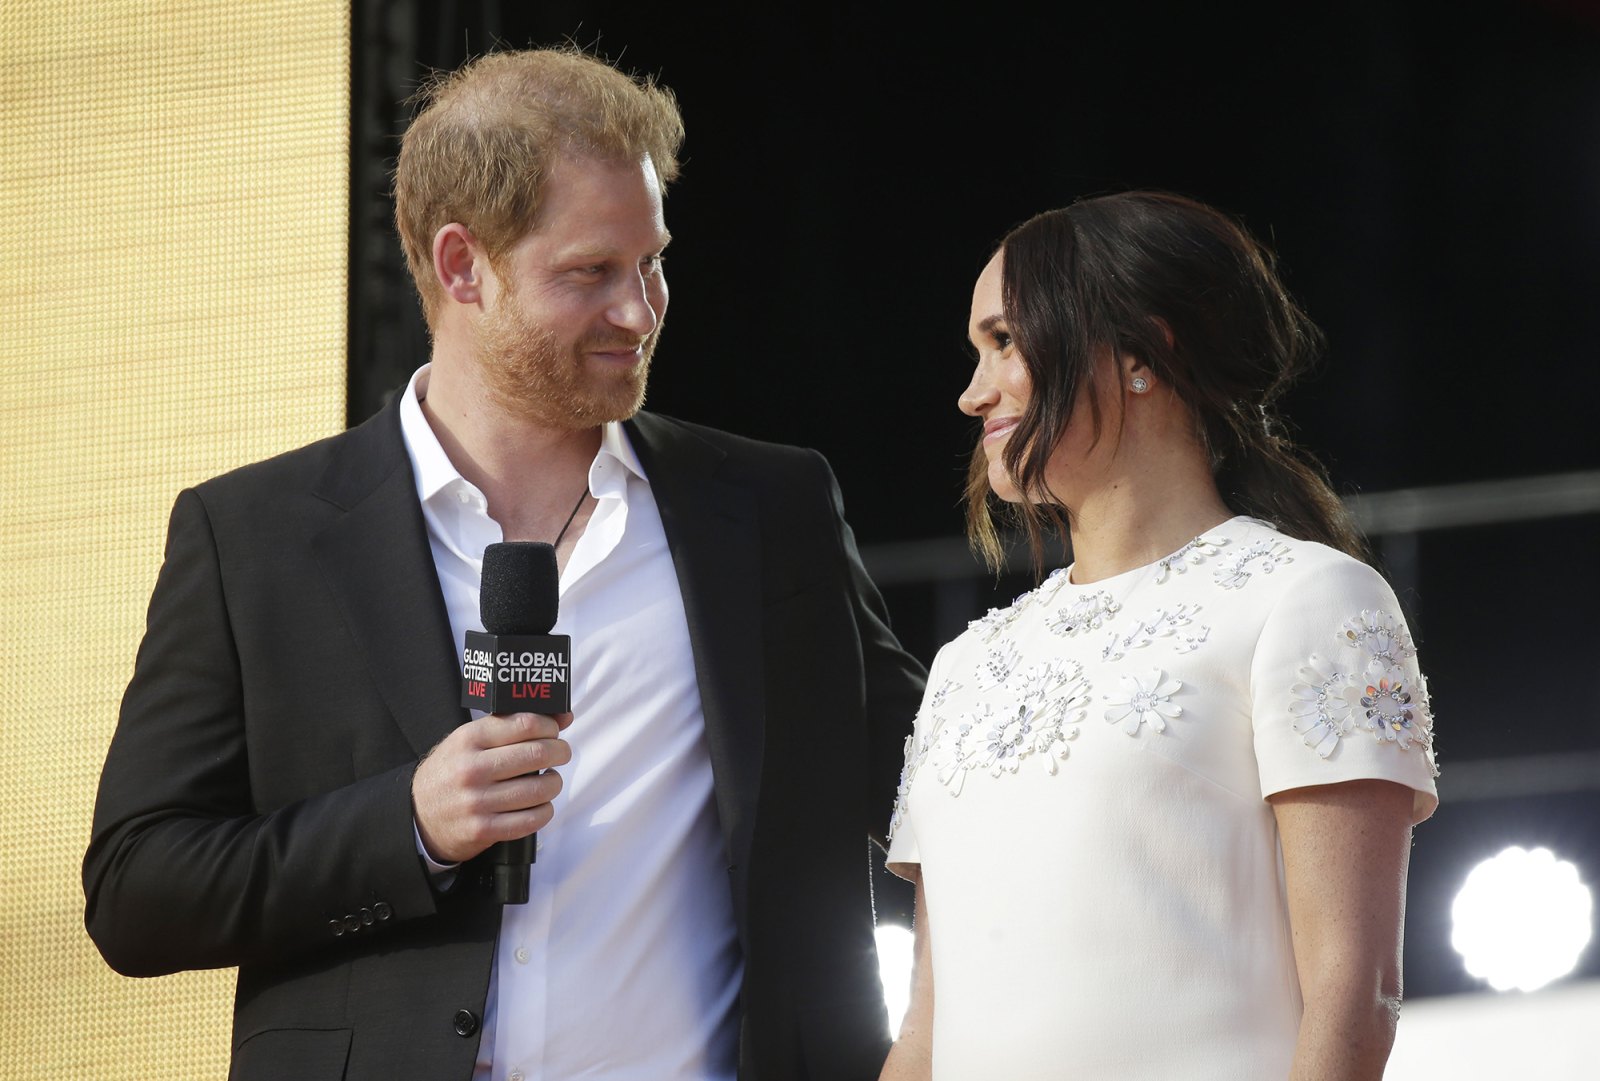 Prince Harry and Meghan Markle being cute at Global Citizen